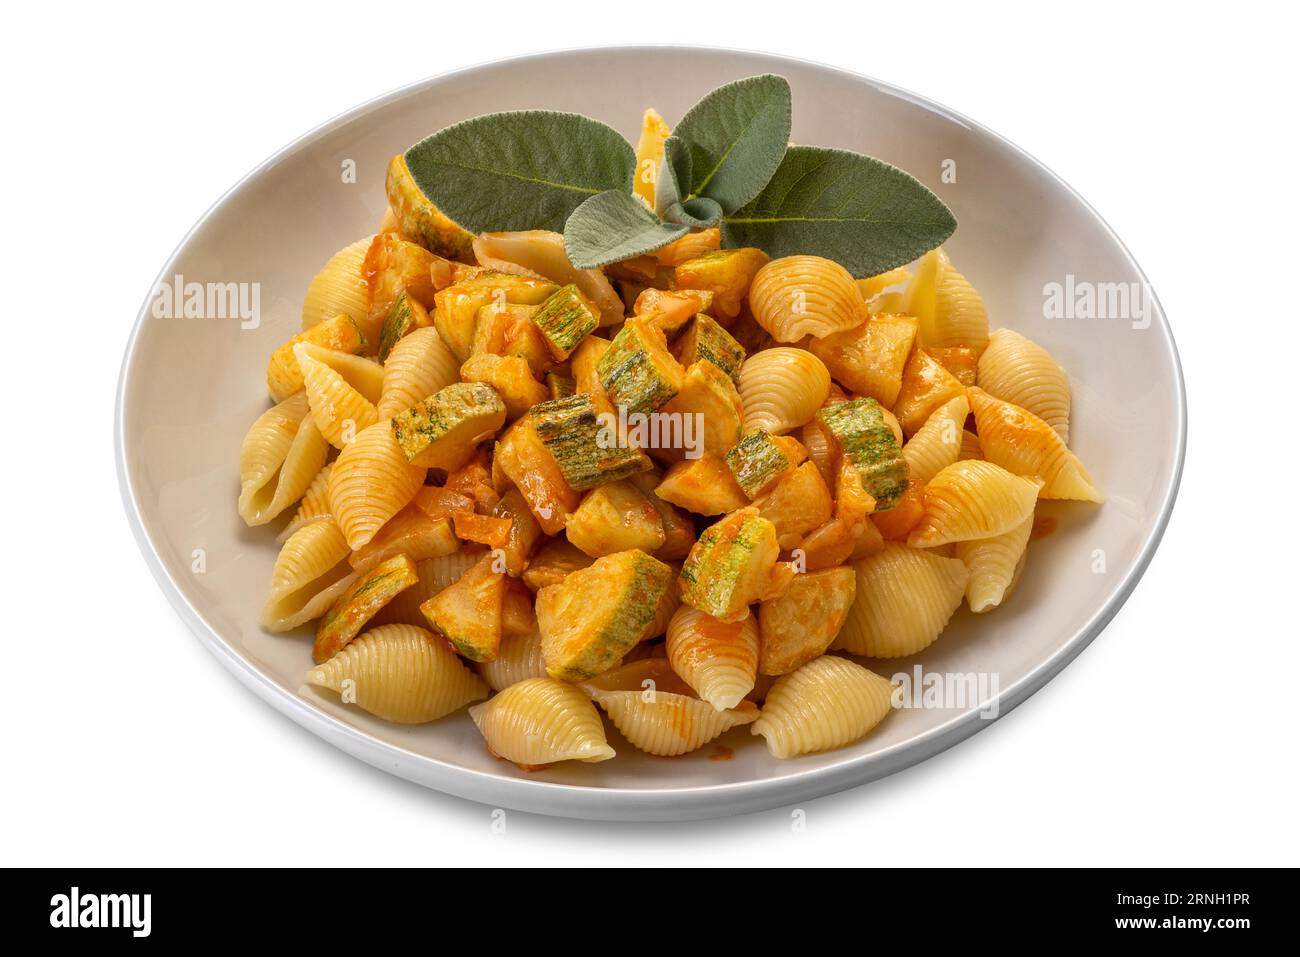 Conchiglie rigate pasta. Macaroni in shape of ridged shell with courgette and tomato sauce with sage leaves in white dish isolated on white with clipp Stock Photo